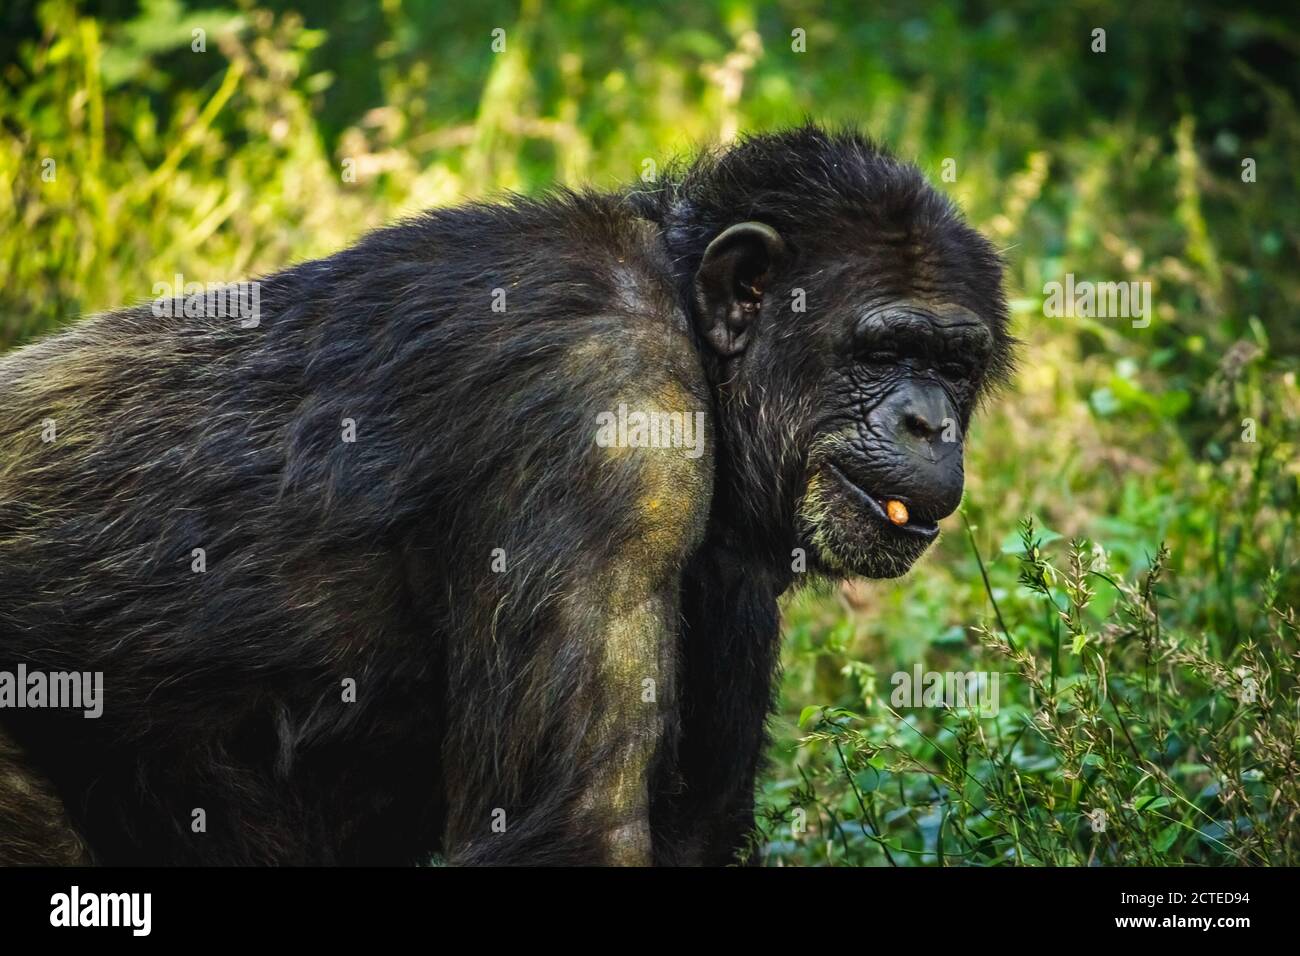 Young gigantic male Chimpanzee standing Captive Chimpanzees in Outdoor Habitat forest jungle and looking at the camera. Chimpanzee in close up view wi Stock Photo